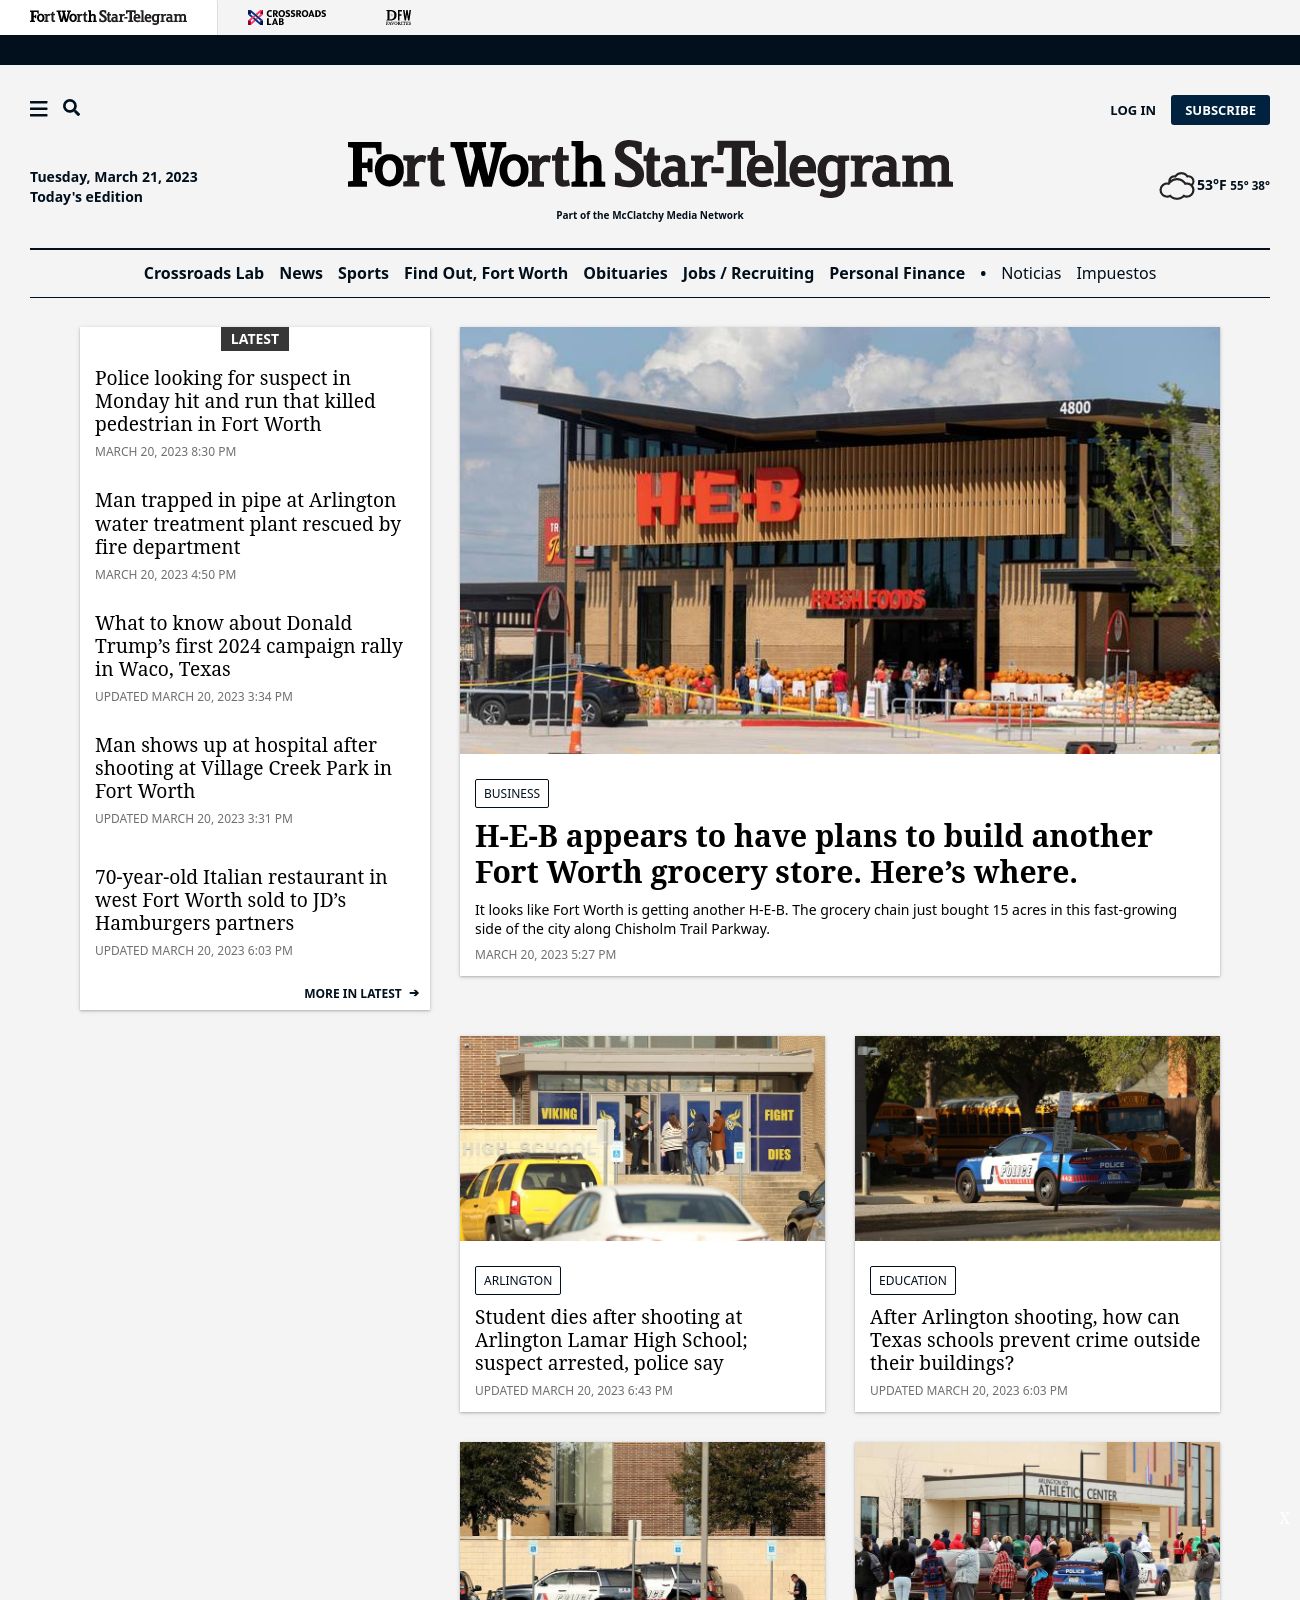 Fort Worth Star-Telegram at 2023-03-20 21:51:43-05:00 local time